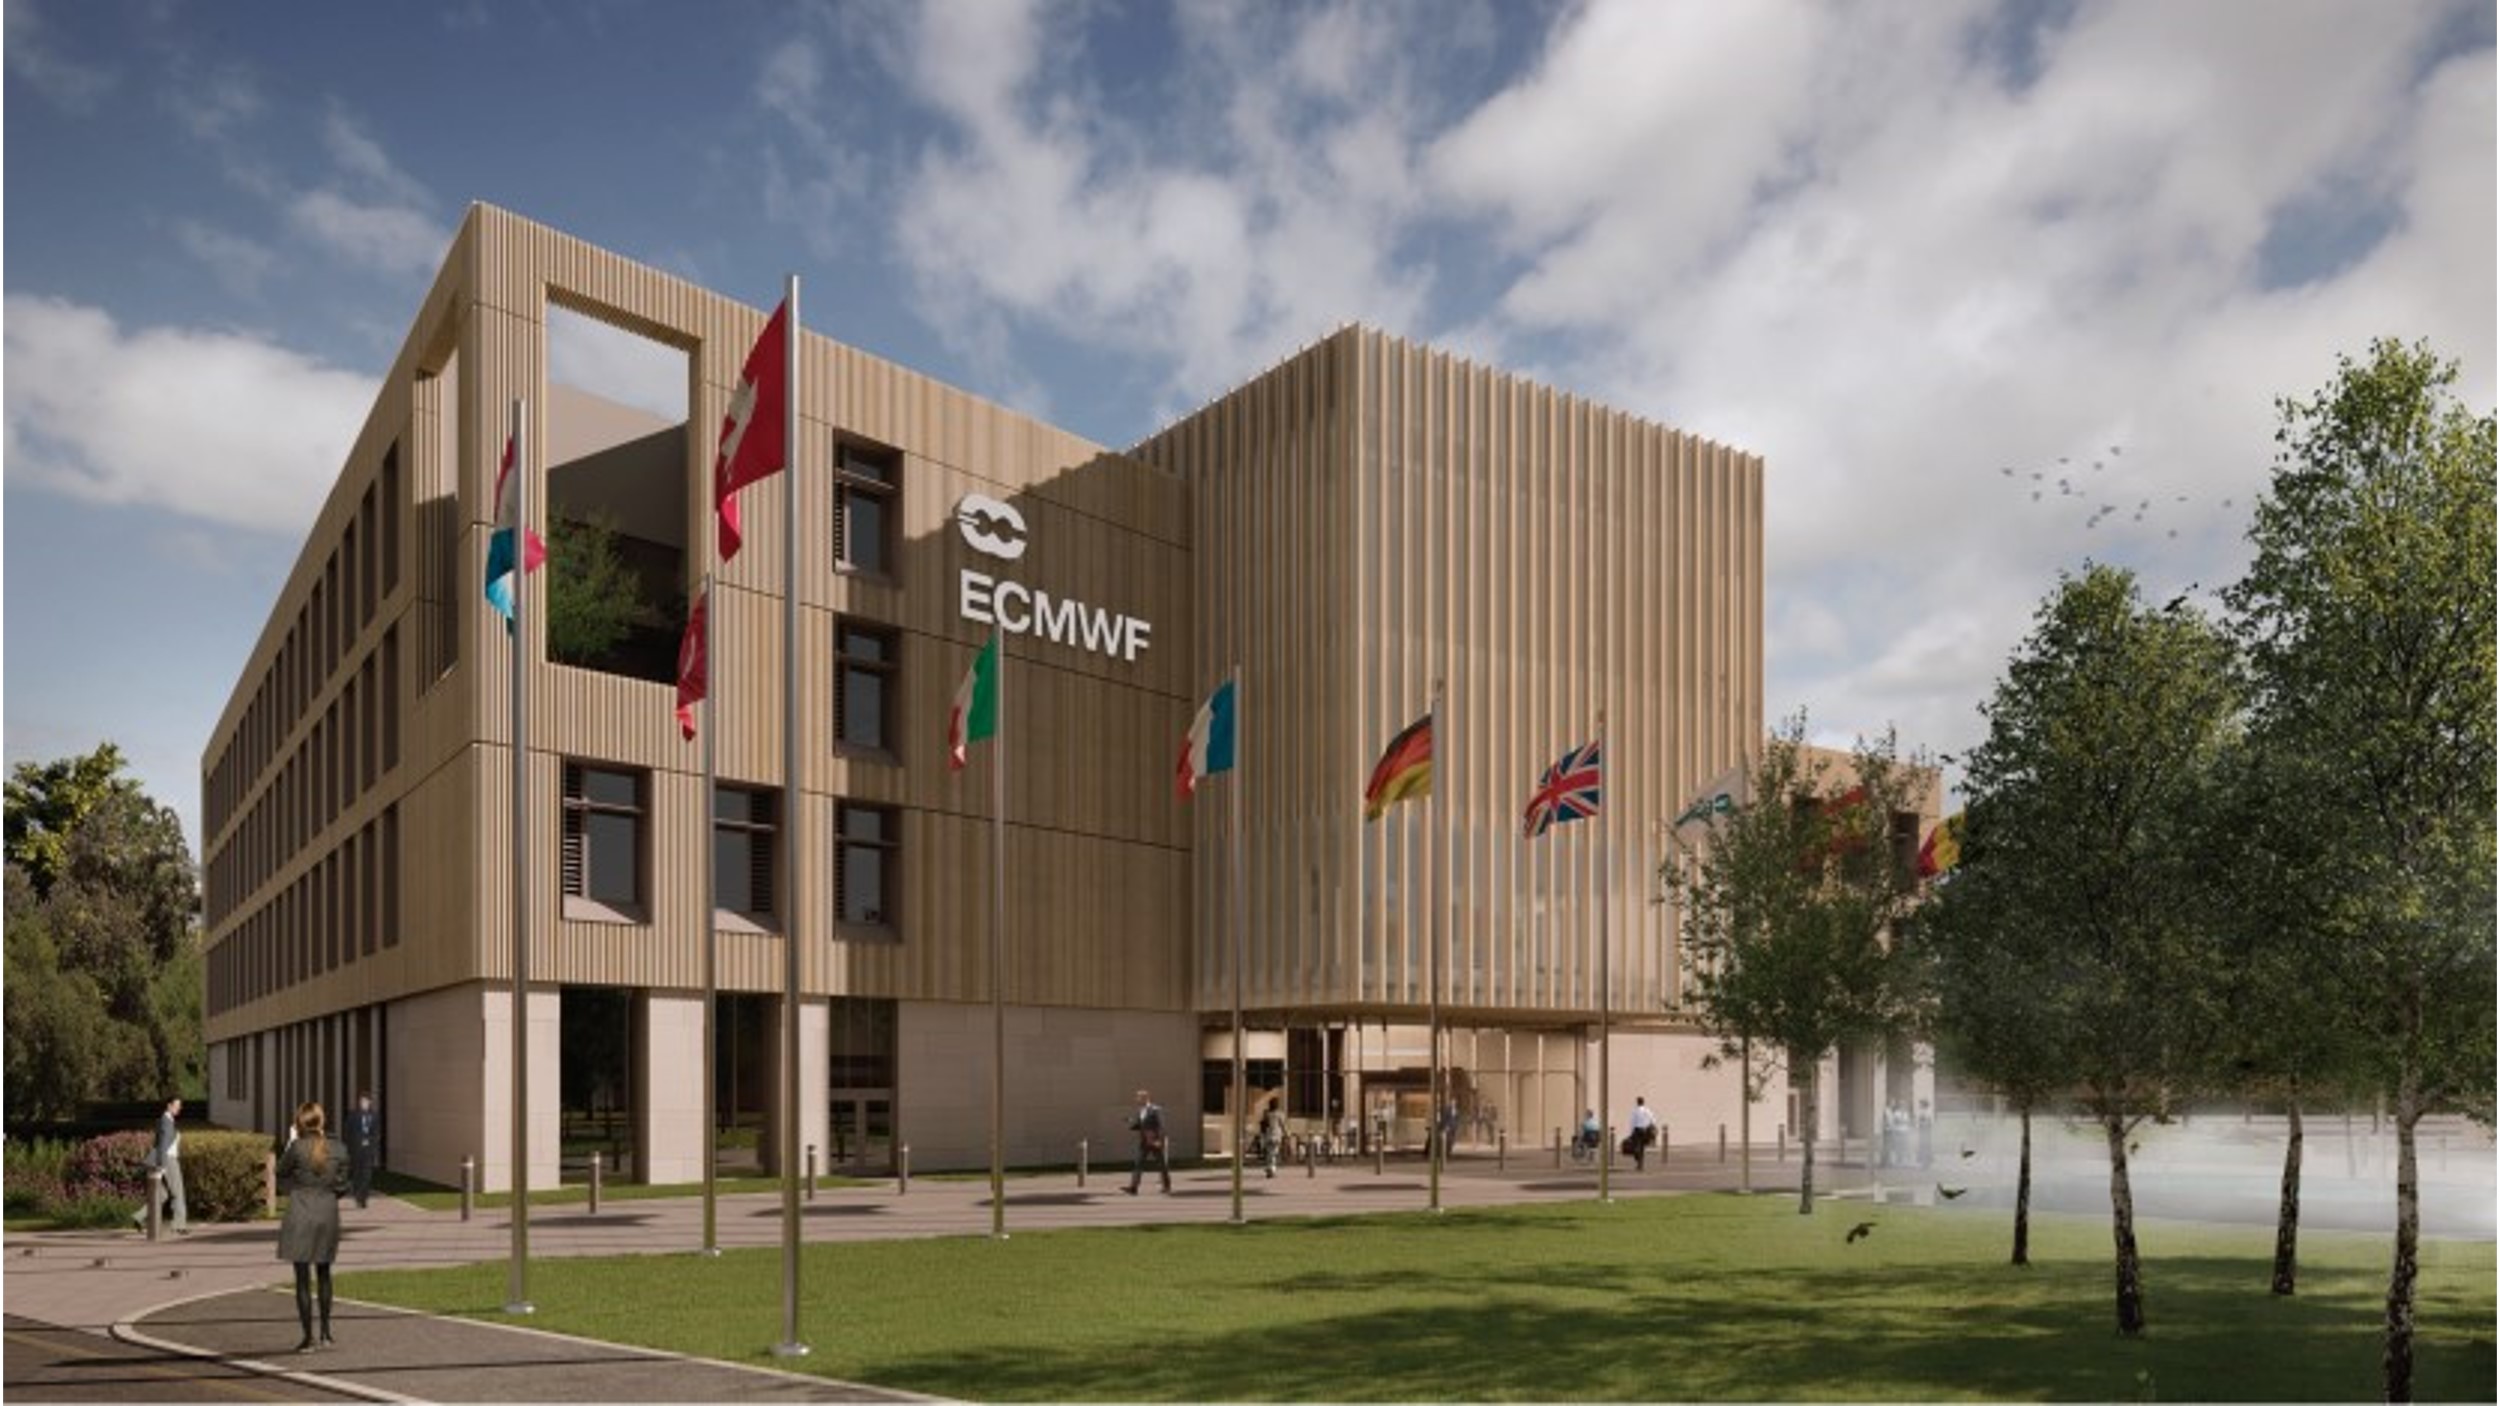 Proposed external face of the new ECMWF building